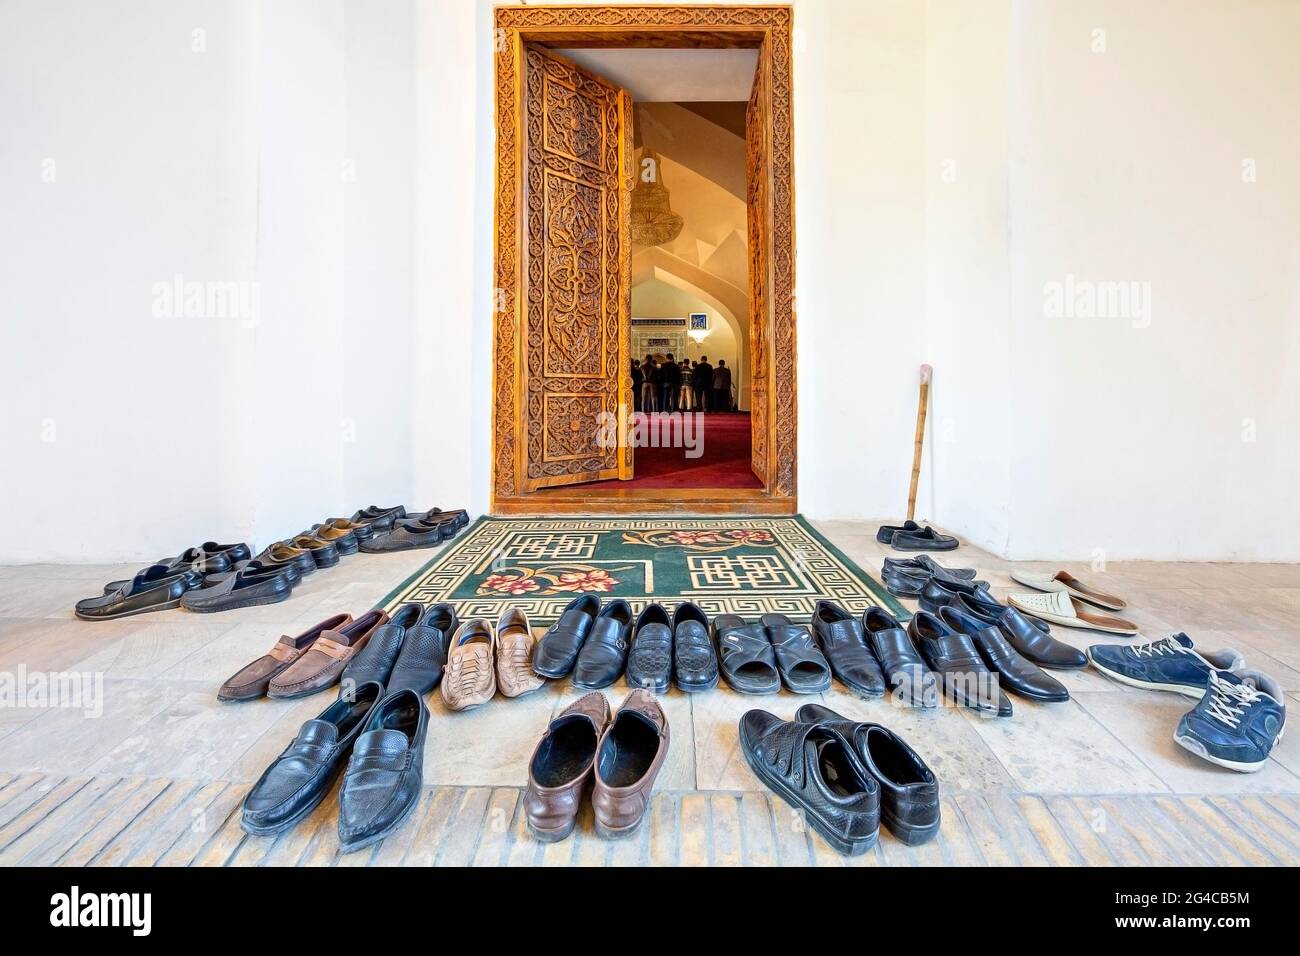 Shoes taken off to get in the mosque with people praying in the background, Samarkand, Uzbekistan Stock Photo